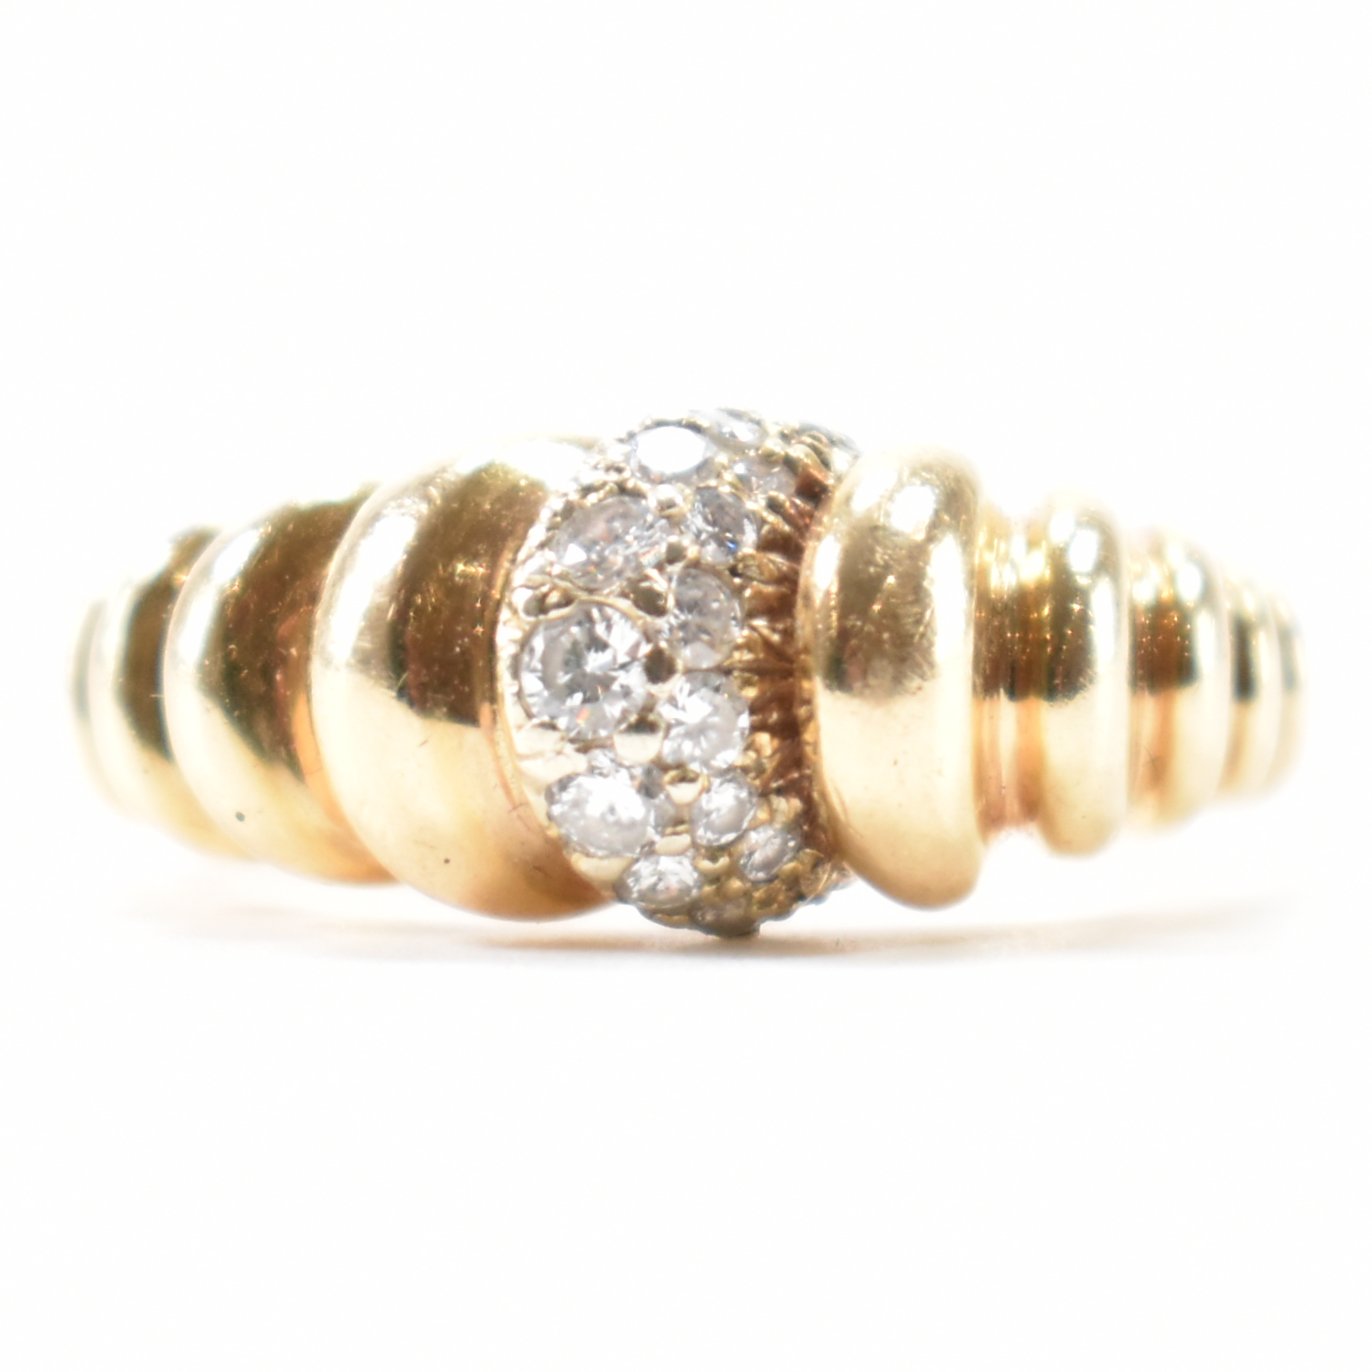 VINTAGE GOLD & DIAMOND REEDED BAND RING